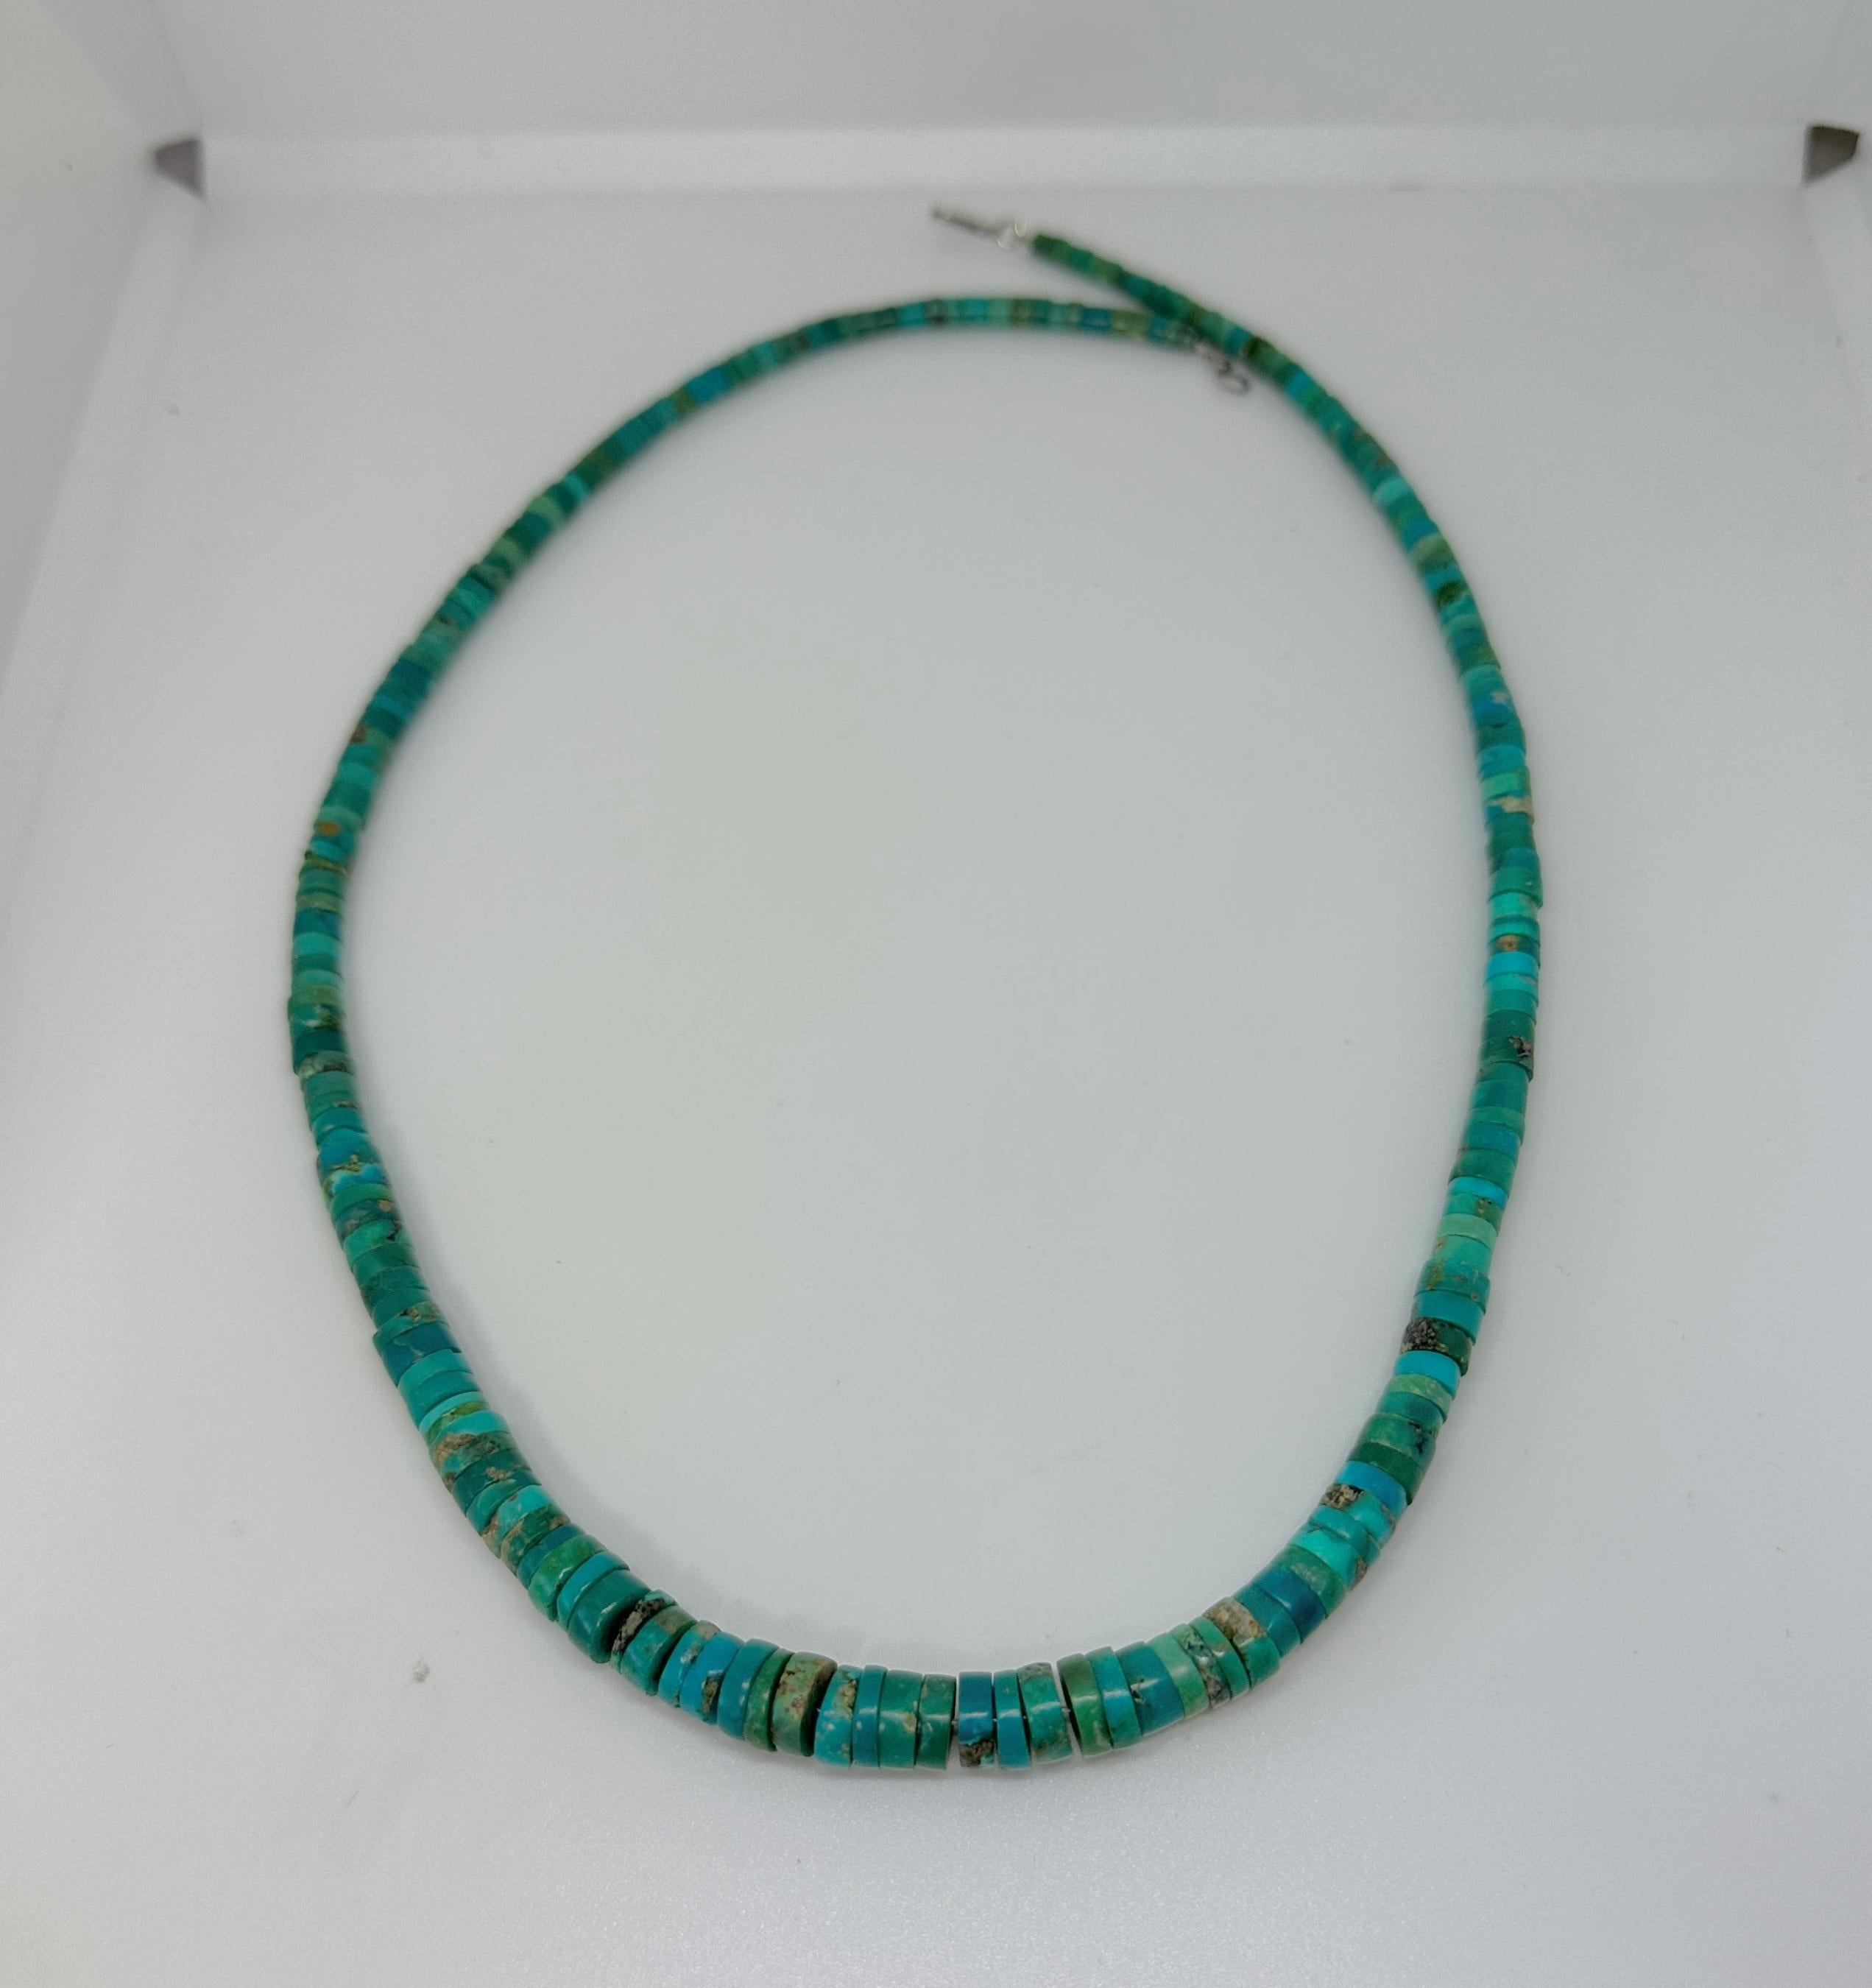 This is a stunning Native American 1920s Caribbean Blue and Green Turquoise Heishi Bead Necklace of 21 inches in length. 
The magnificent hand cut Turquoise Heishi Beads are graduated from 4 to 8mm in diameter. The necklace is fabulous piece of